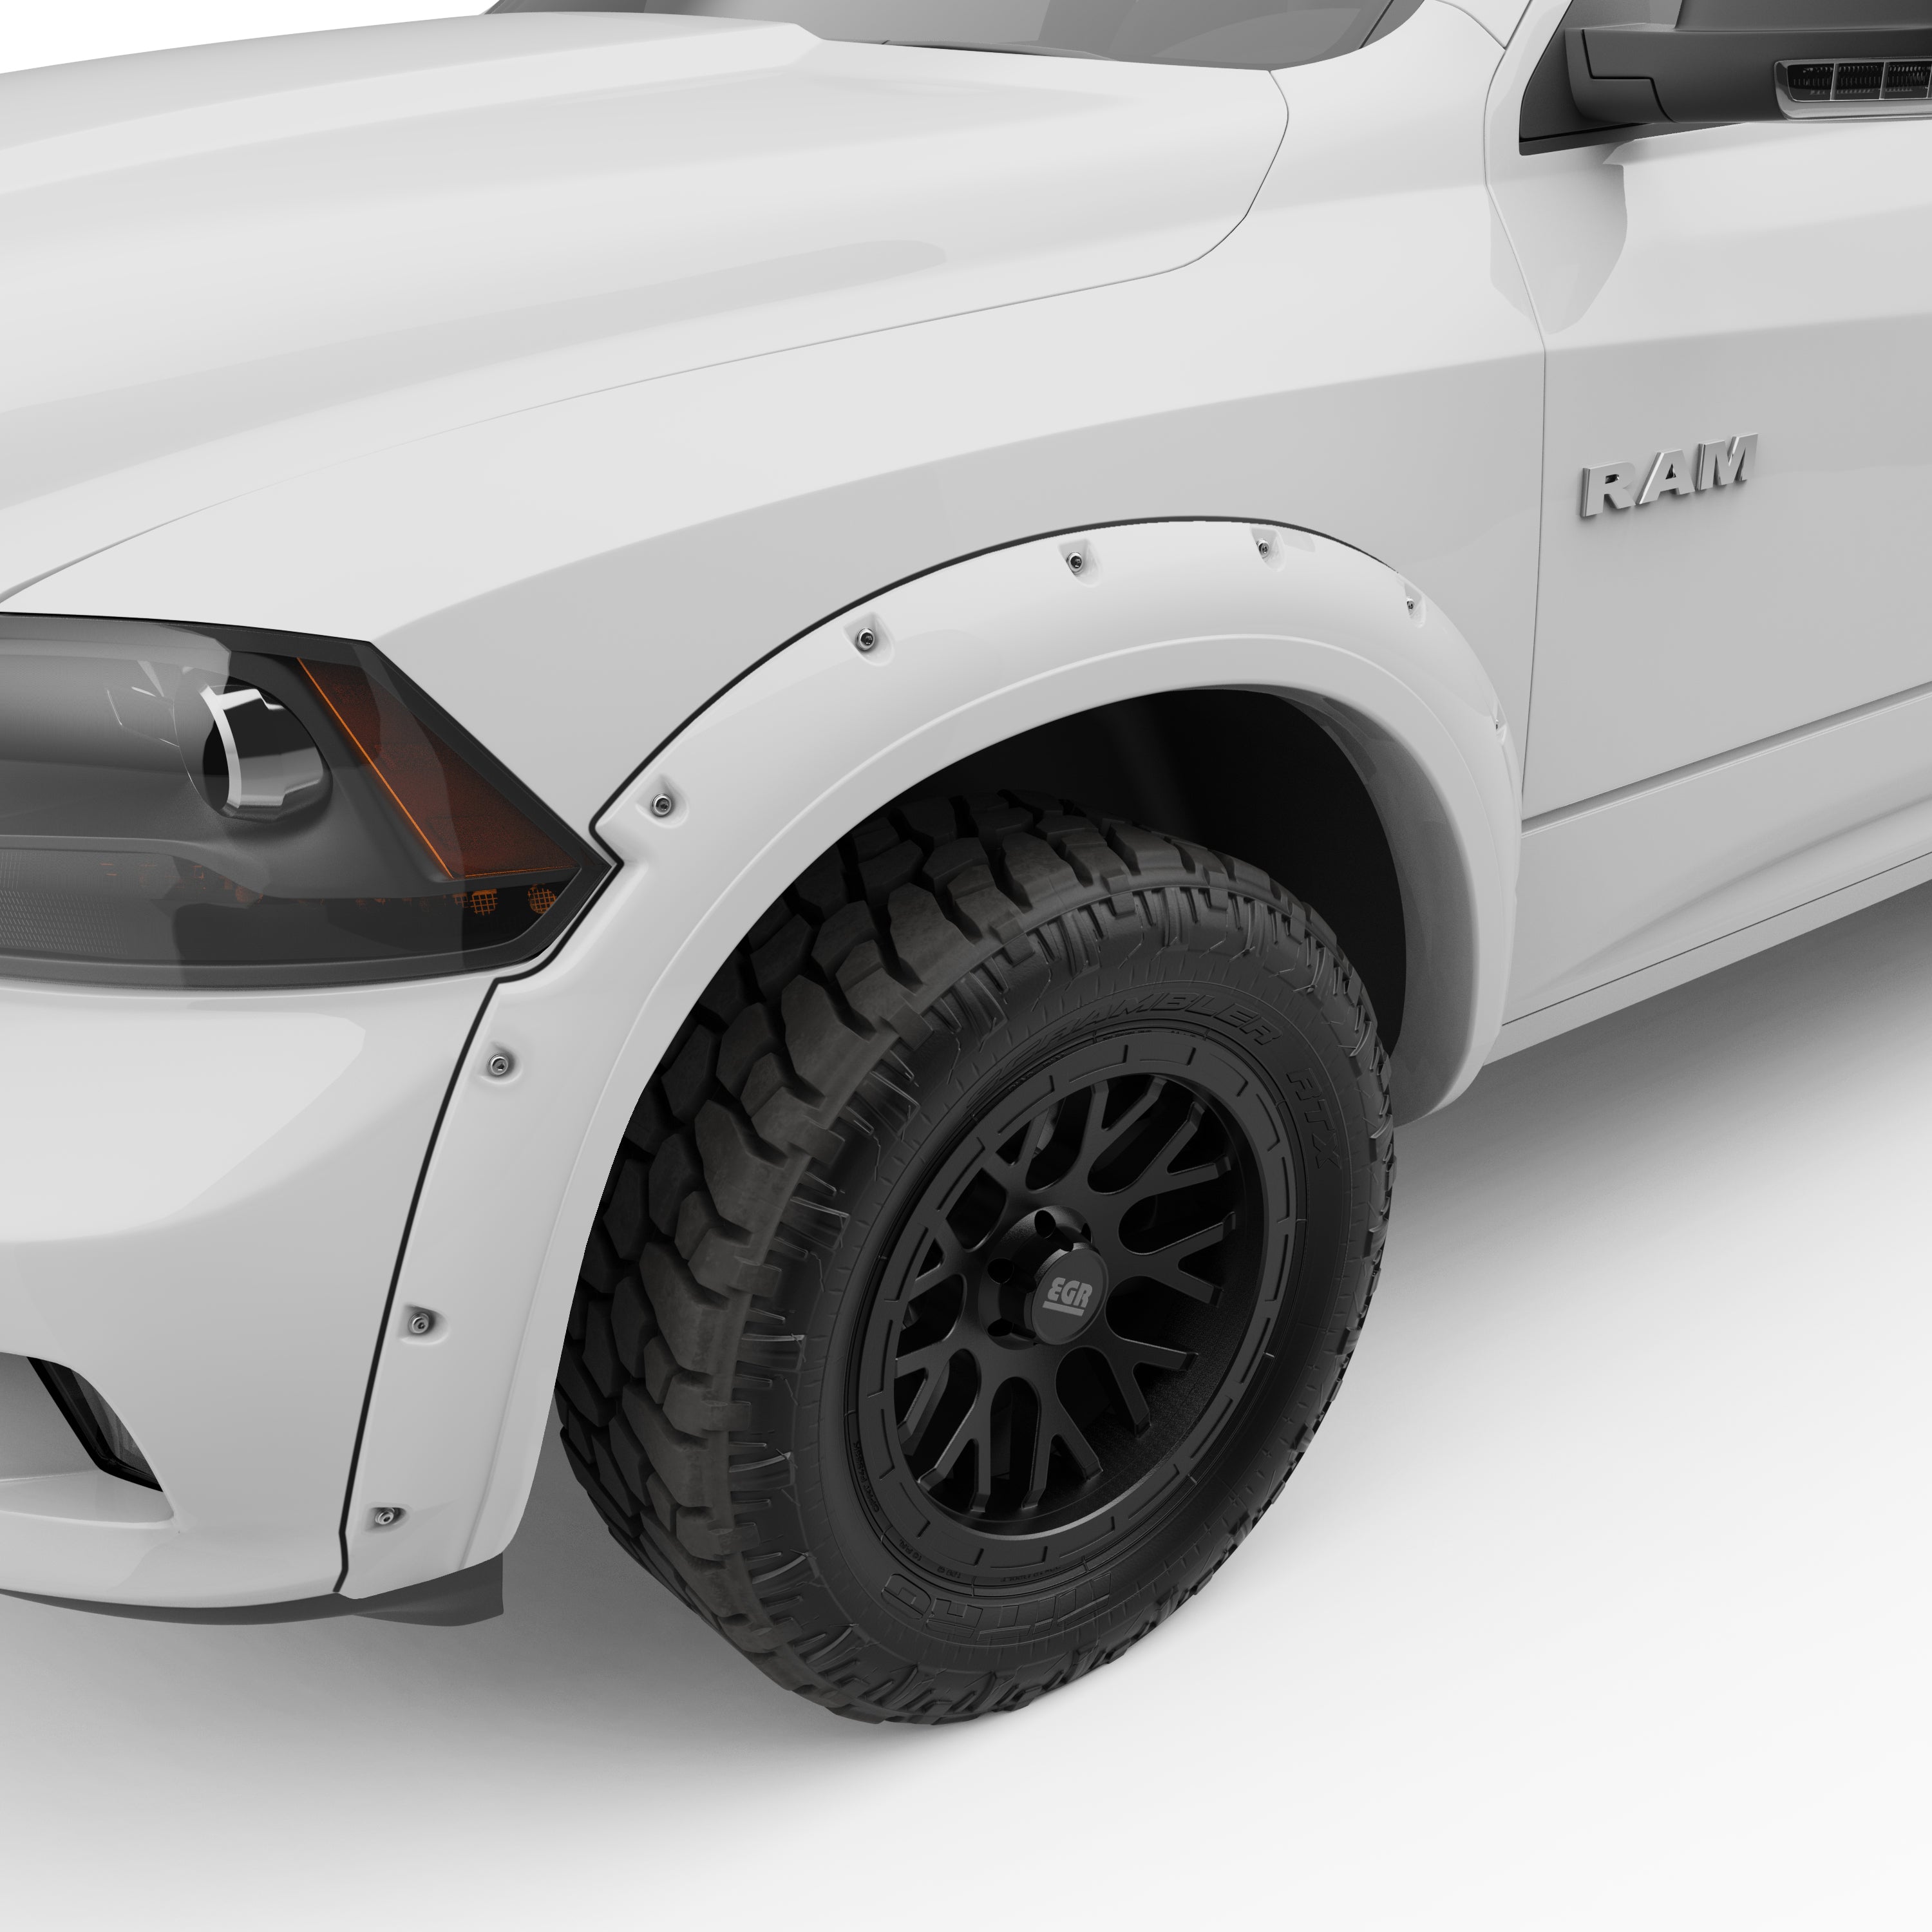 EGR Traditional Bolt-on look Fender Flares 11-18 Ram 1500 19-22 Ram 1500 Classic Painted to Code Bright White